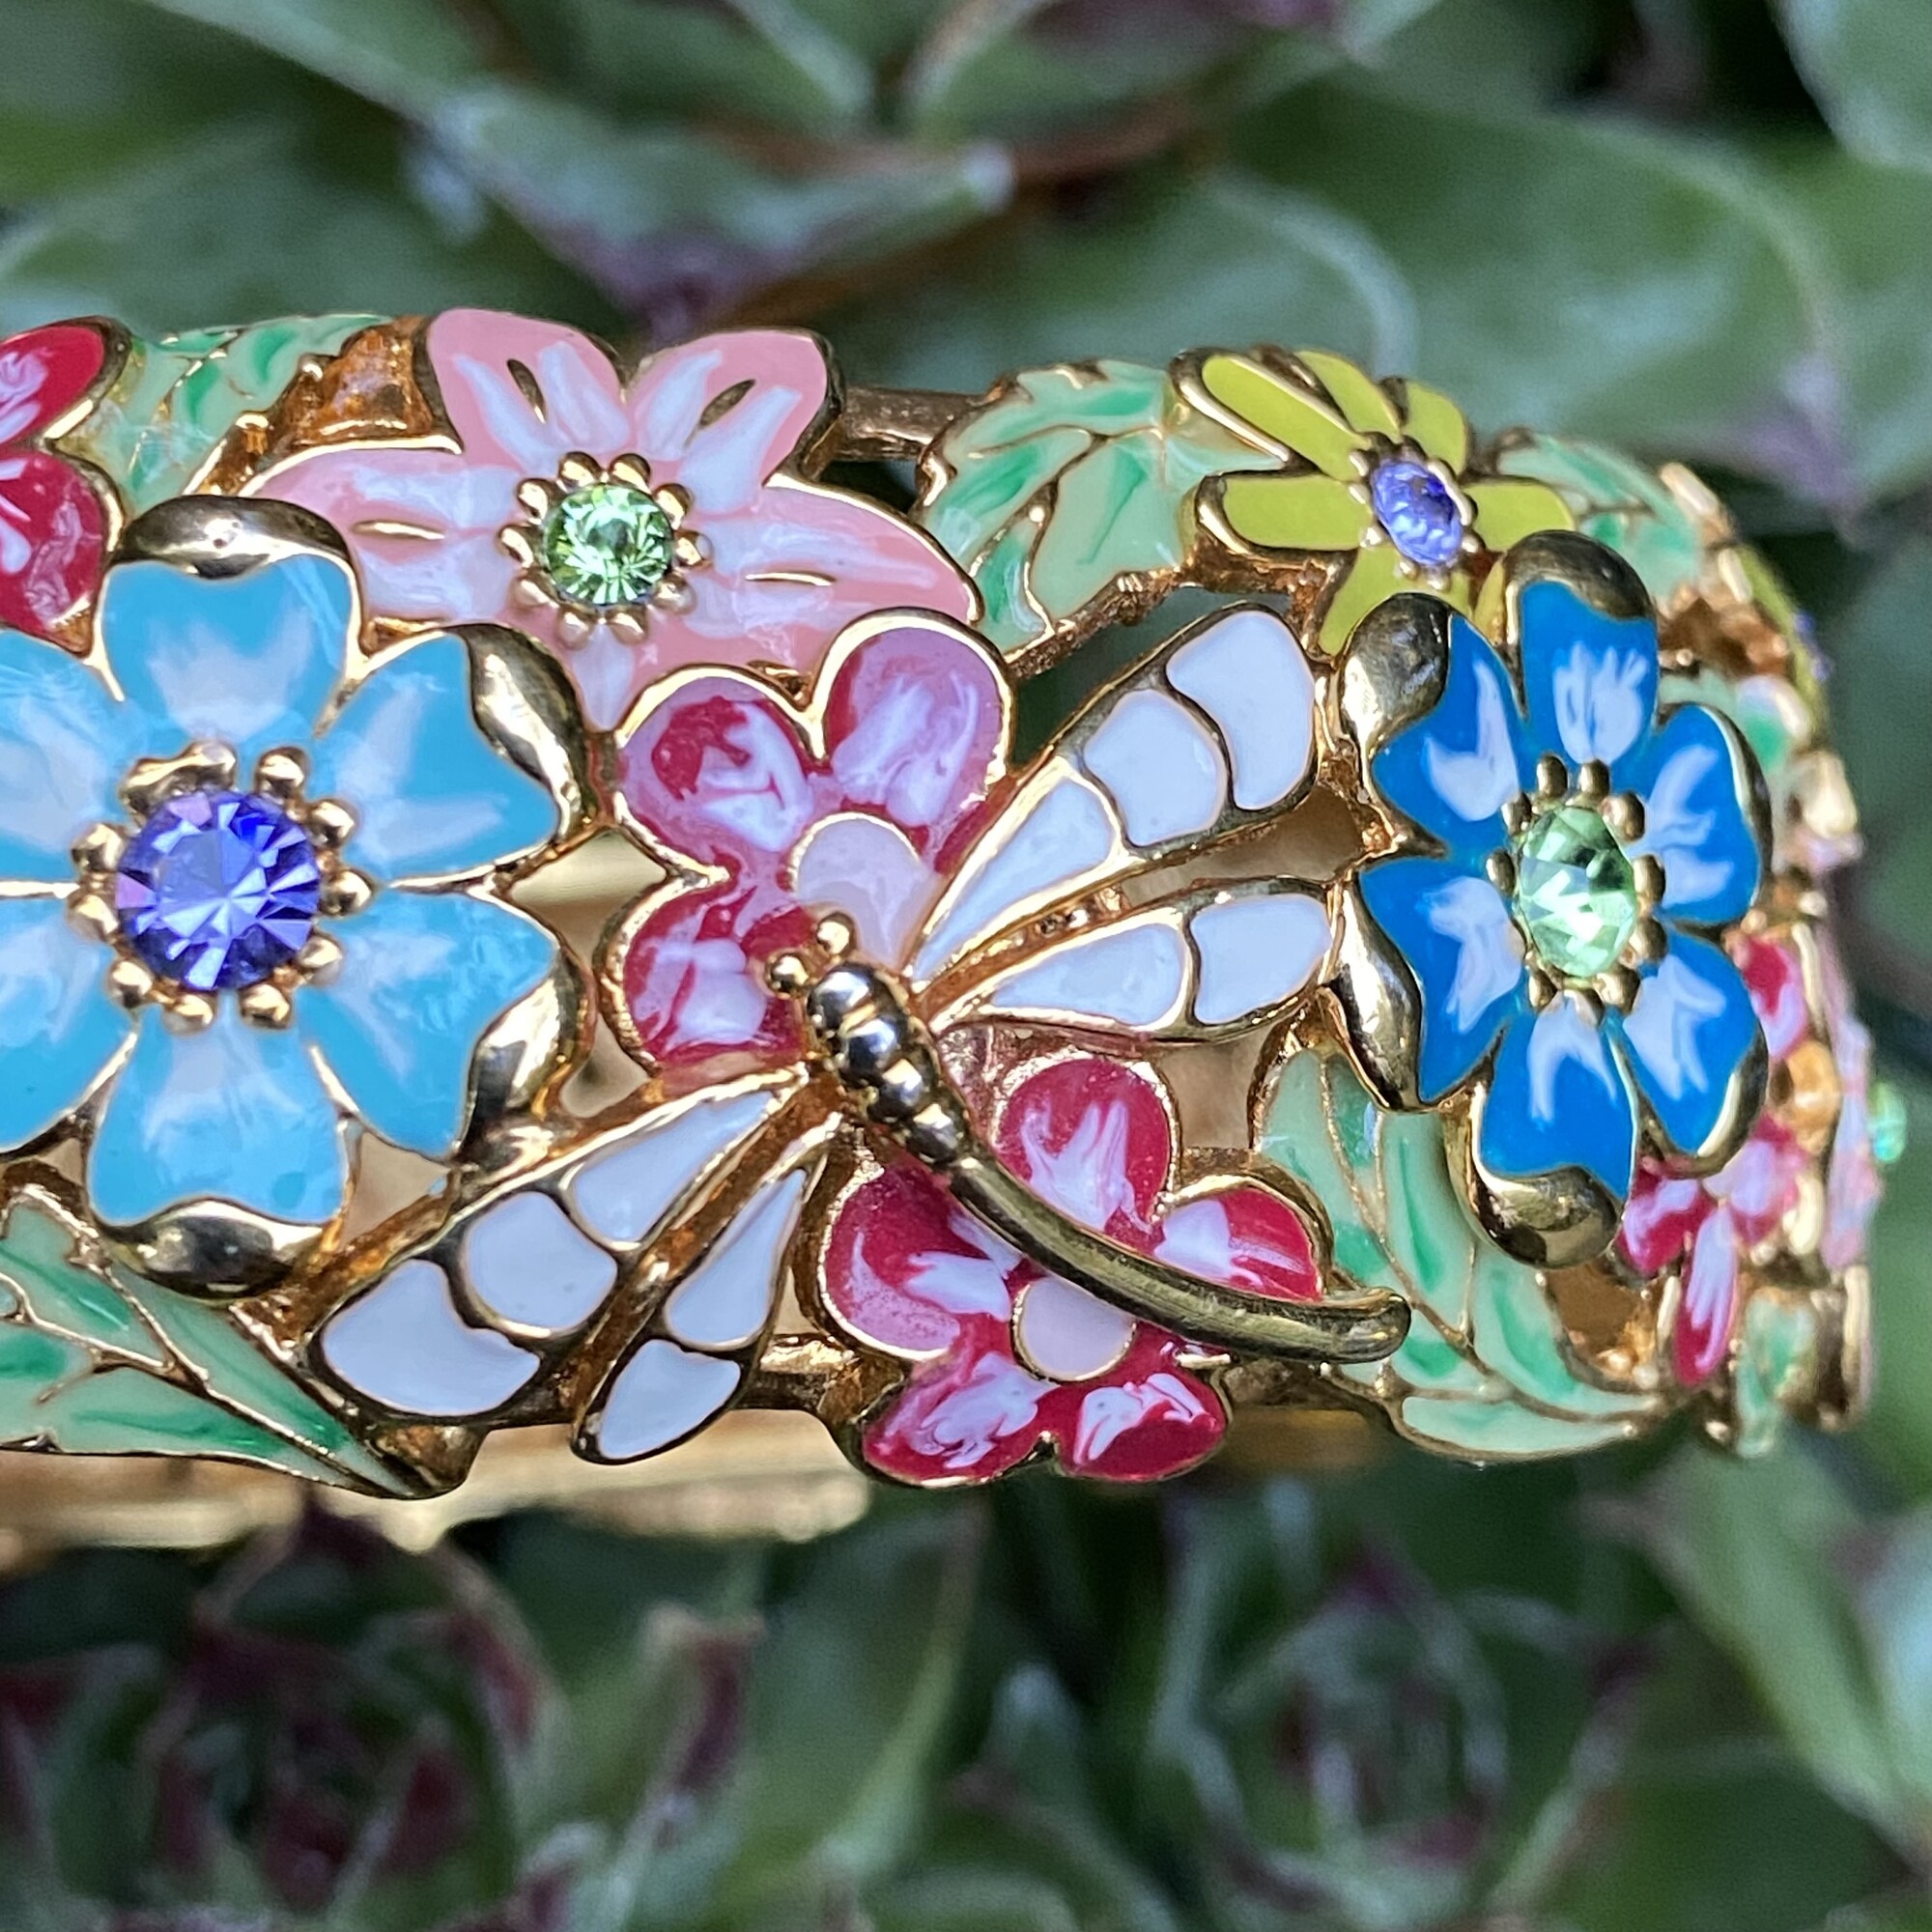 Joan Rivers Enamel Colorful Flowers Dragonfly Hinged Bracelet Gold Tone Rare HTF
Goldtone oval shape; cutout floral design; epoxy enamel, round faceted crystals in shades of blue, lilac, and green
Snap hinge
Signed Joan Rivers
Fits an average-sized wrist- Interior circumference measures approximately 7L
Measures approximately 7/8W